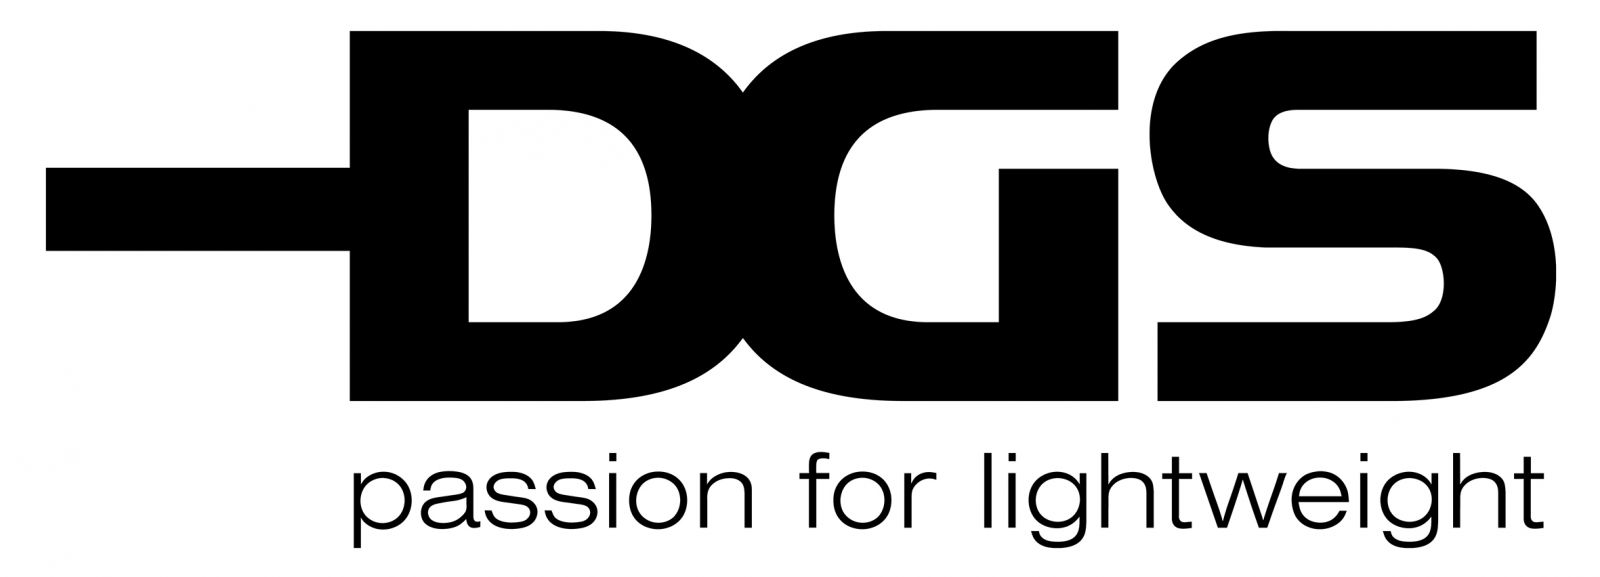 logo DGS - passion for lightweight
